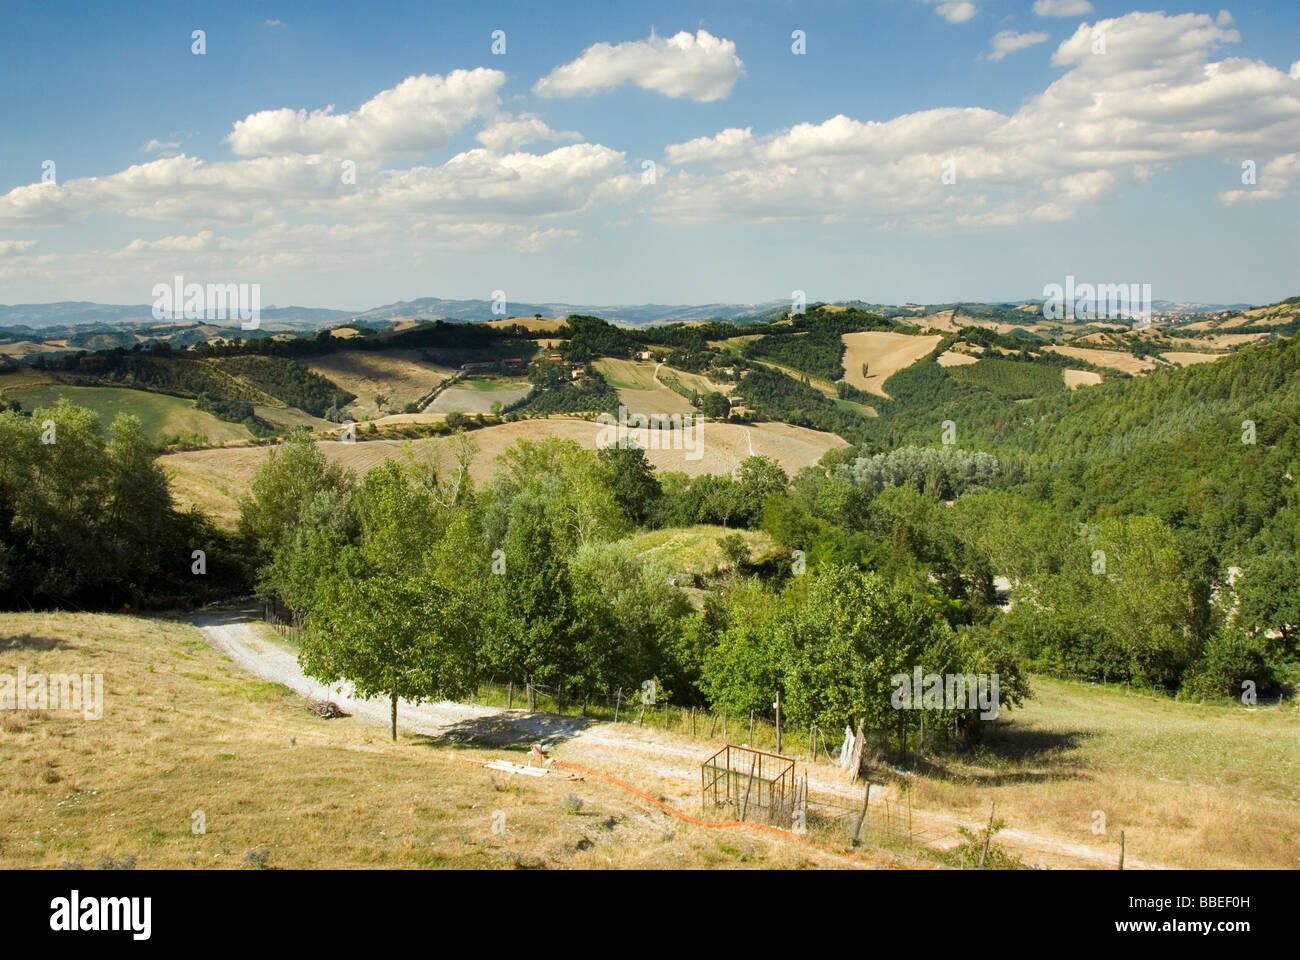 Landscape of Le Marche region of Central Italy Stock Photo